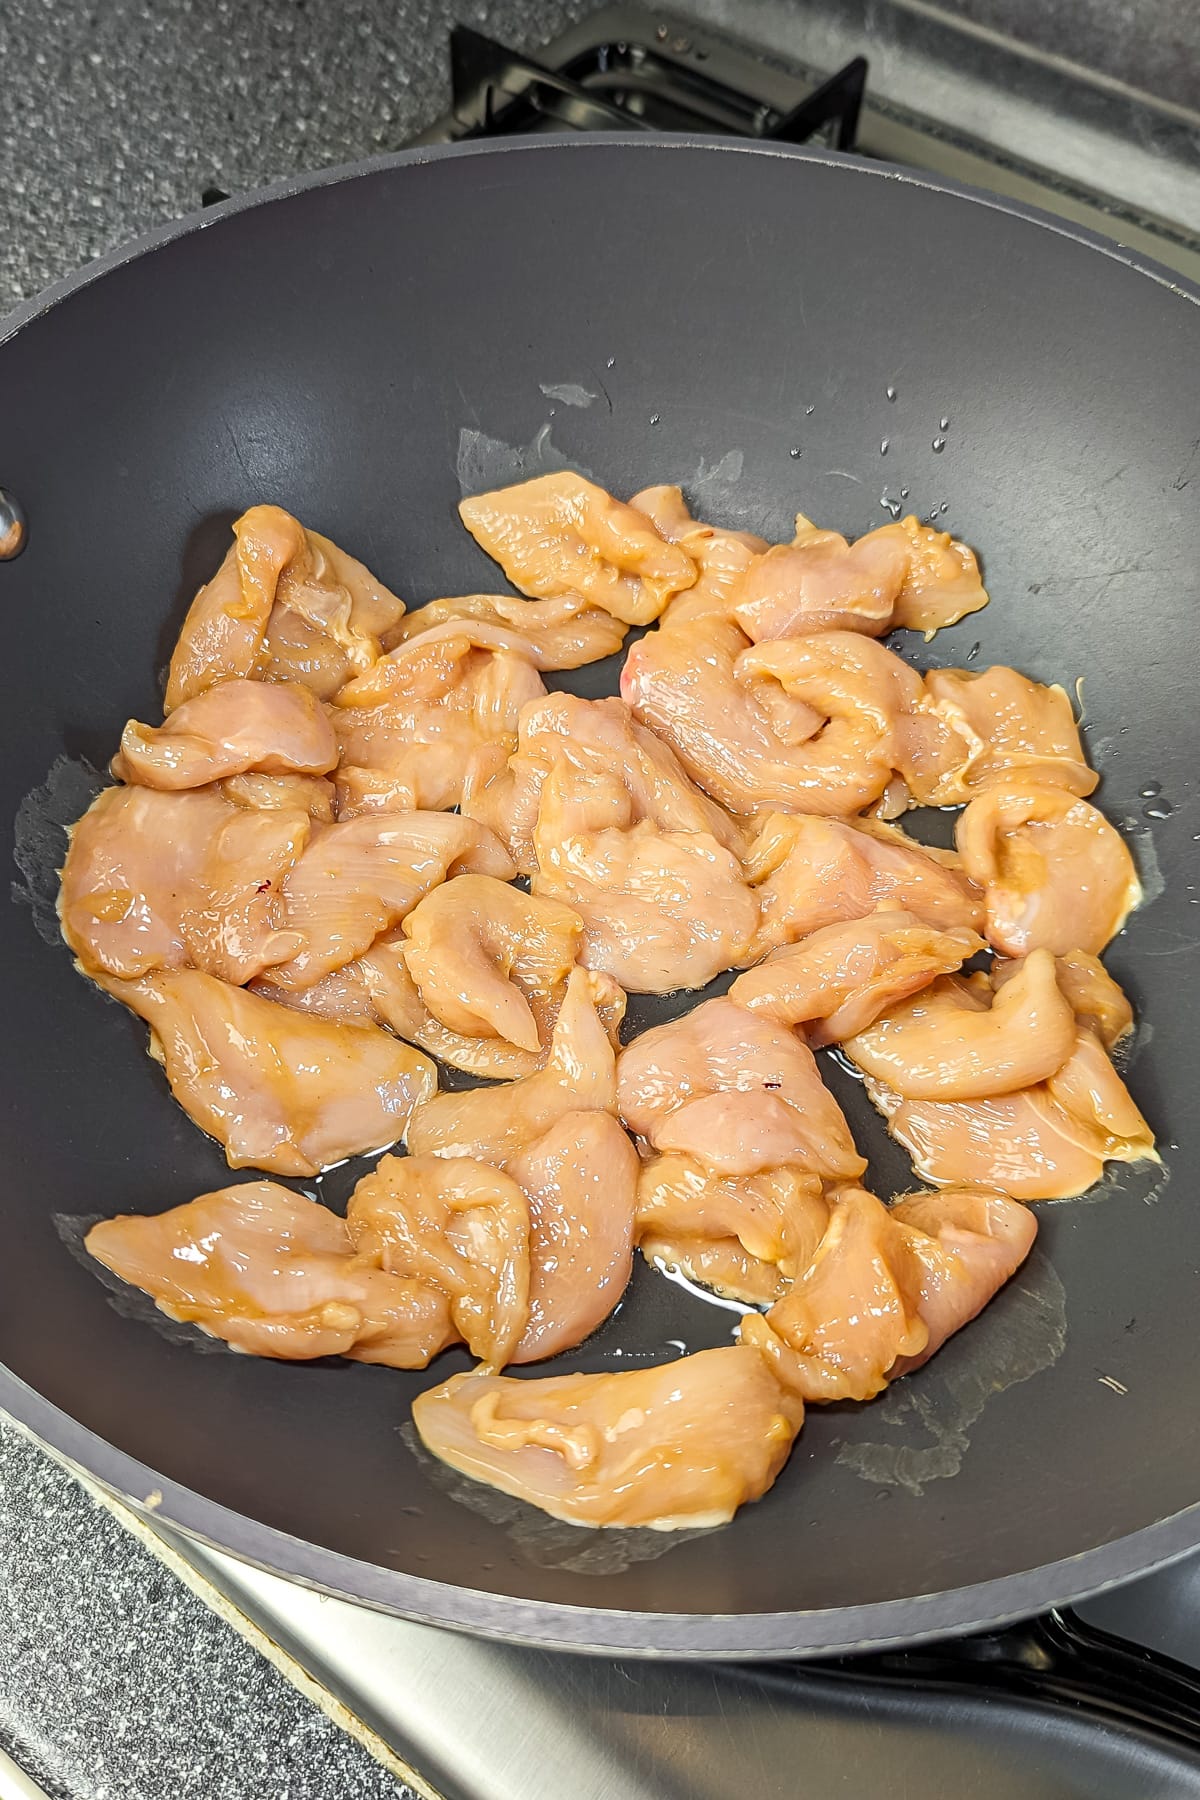 Chicken pieces being cooked in a non-stick pan until golden brown.